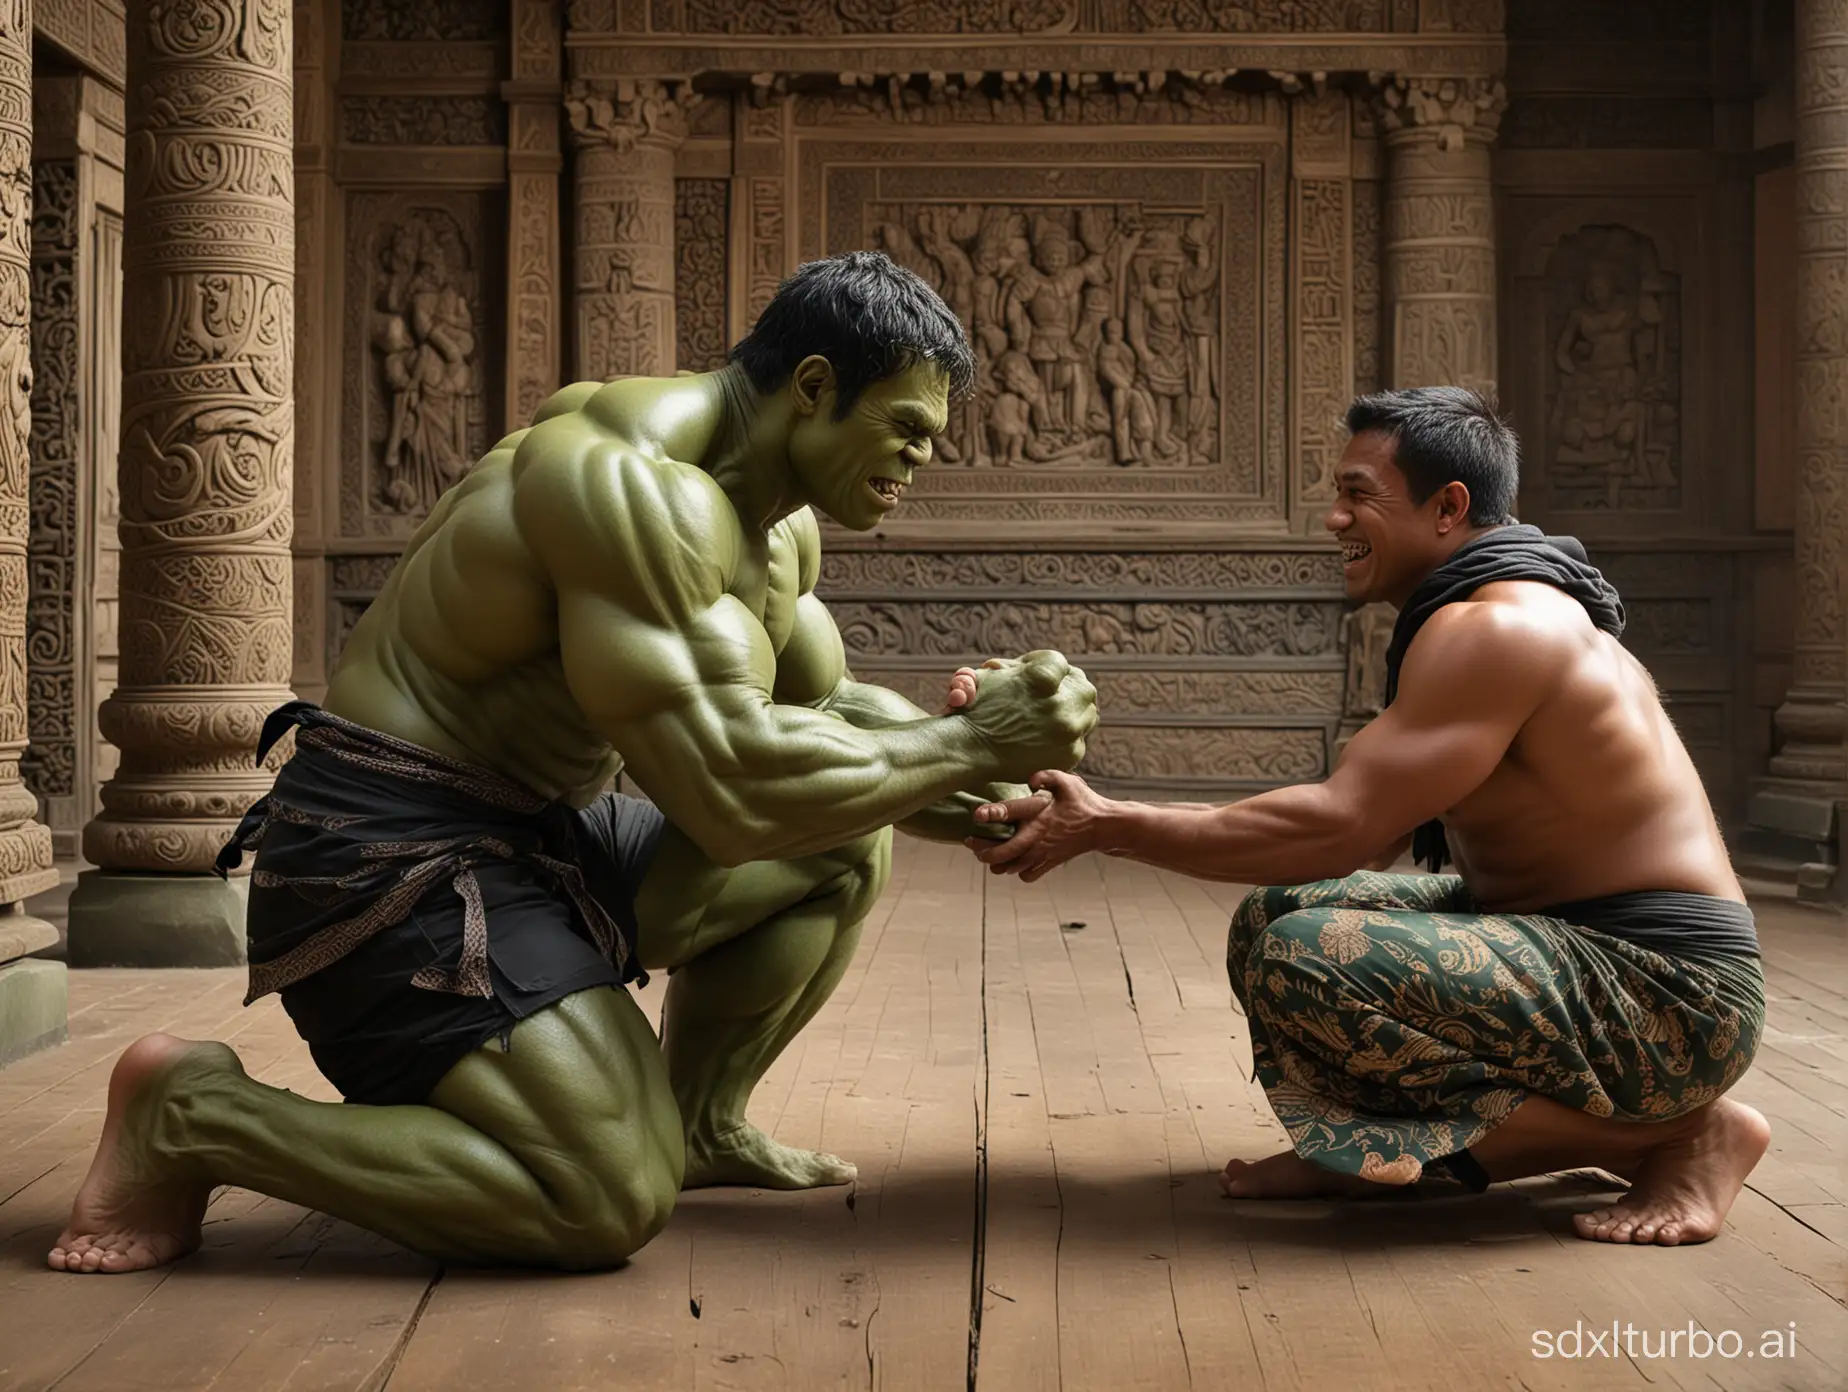 Hulk-Bows-in-Sorrowful-Reunion-with-Indonesian-Man-in-Palace-Room